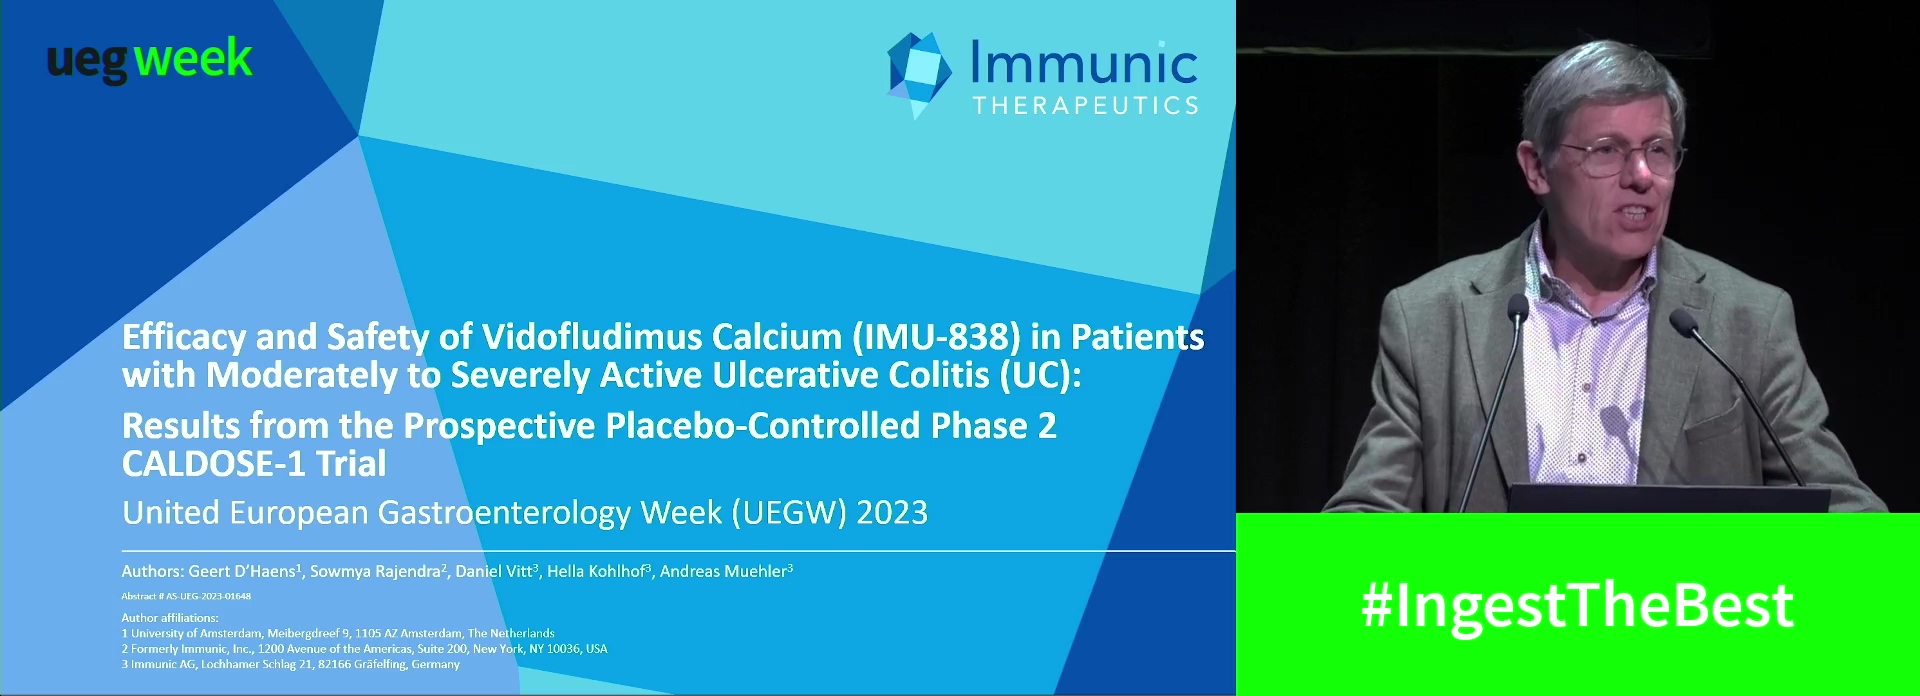 EFFICACY AND SAFETY OF VIDOFLUDIMUS CALCIUM (IMU-838) IN PATIENTS WITH MODERATELY TO SEVERELY ACTIVE ULCERATIVE COLITIS (UC):  RESULTS FROM THE PROSPECTIVE PLACEBO-CONTROLLED PHASE 2 CALDOSE-1 TRIAL